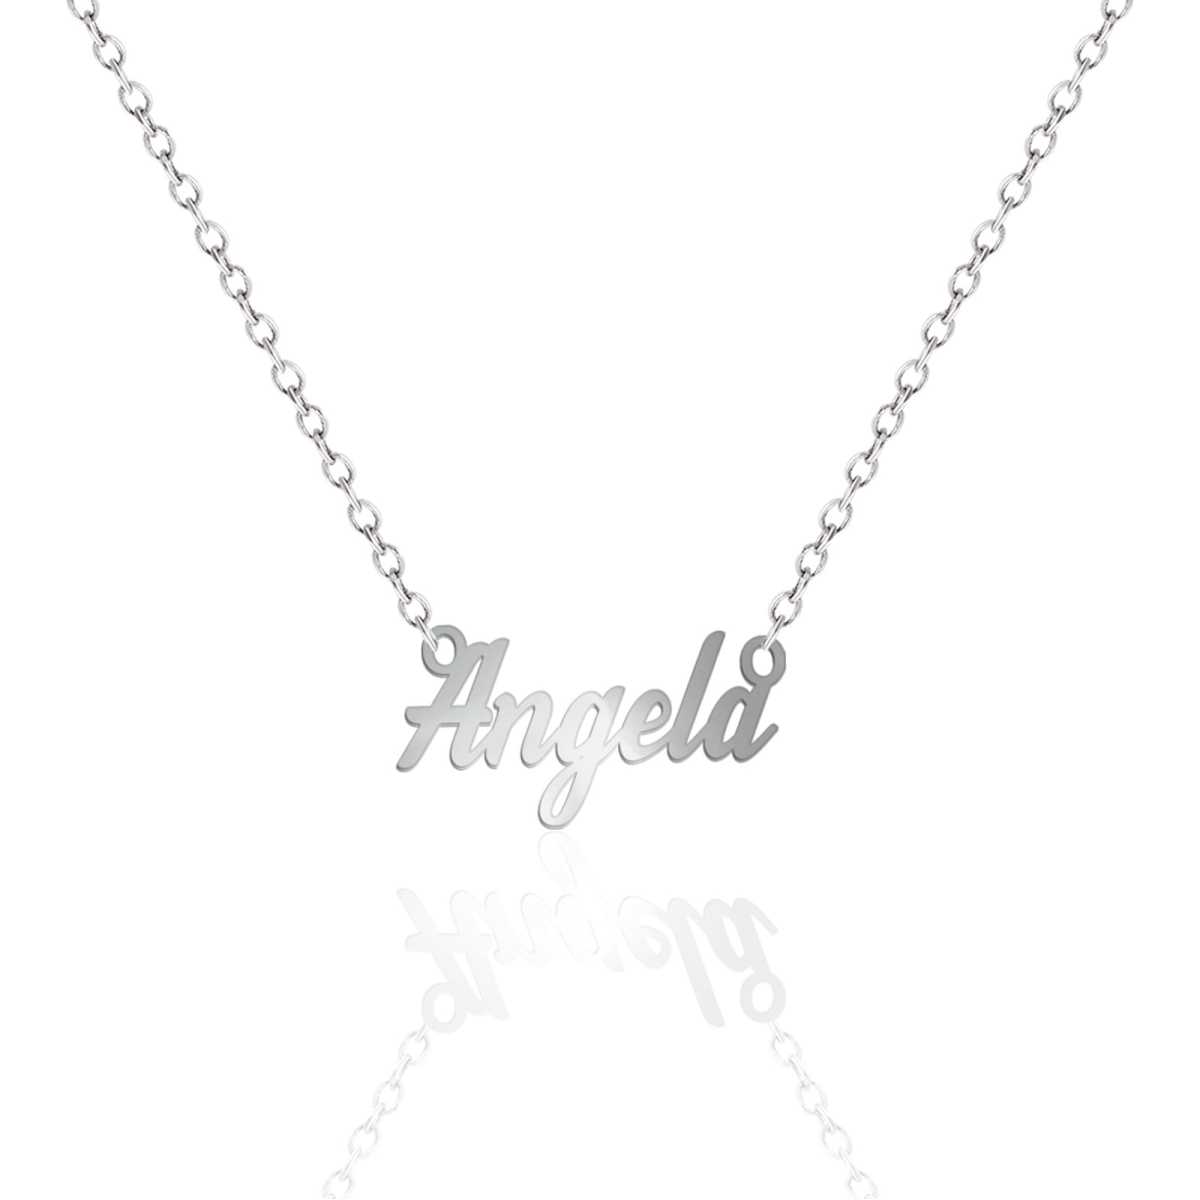 Personalized Name Necklace - | Mali's Canadian Jewelry Mali's 1 Metal Part: Gold Vermeil - Personalized Name Necklace - | Mali's